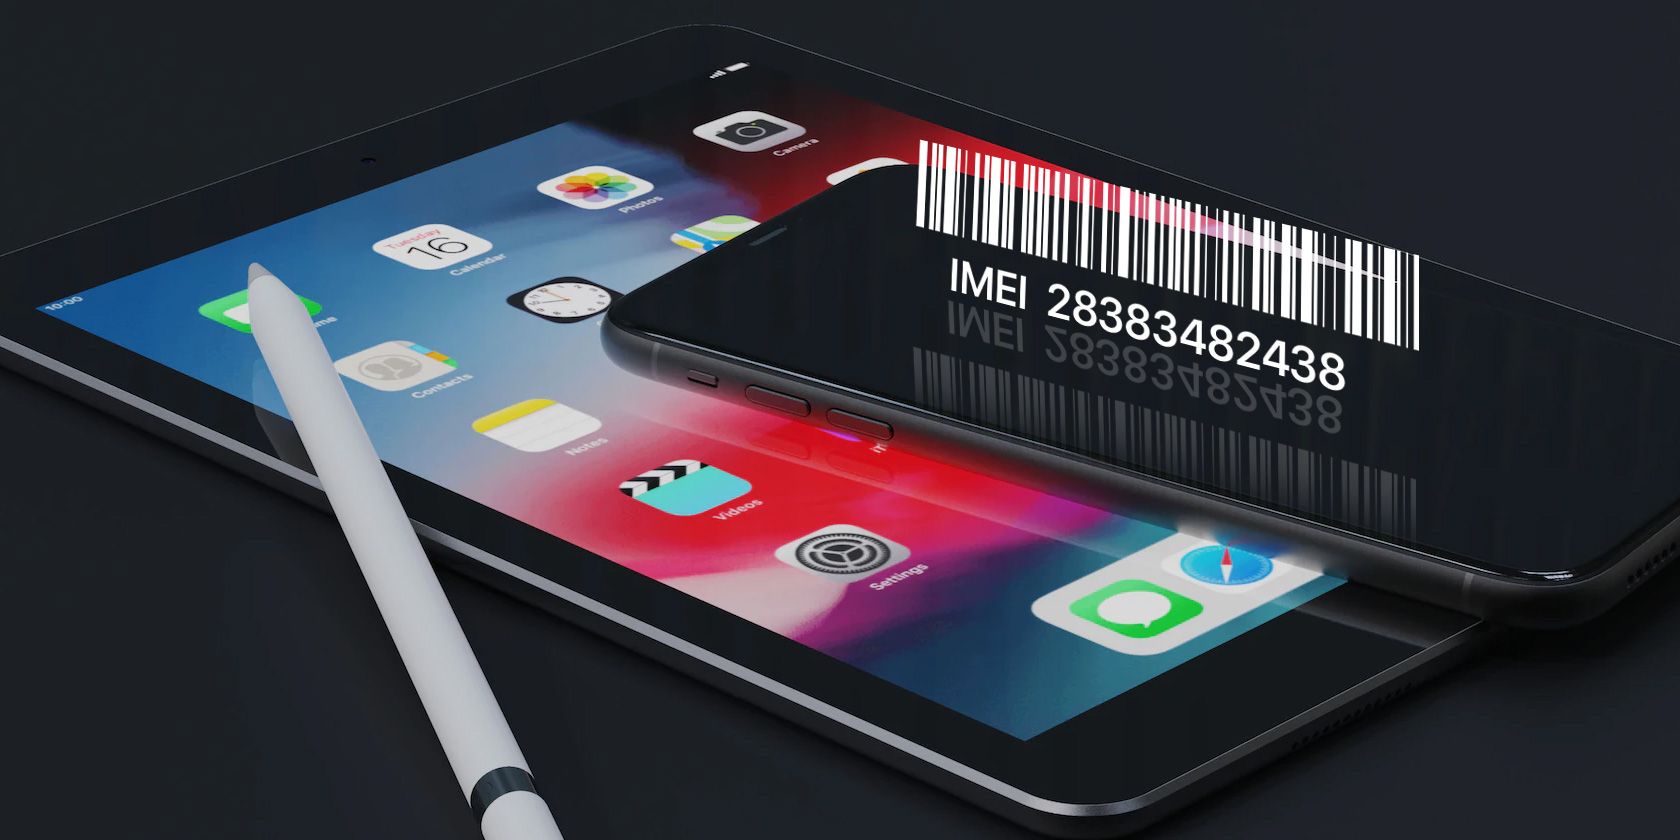 Find the serial number or IMEI on your iPhone, iPad, or iPod touch